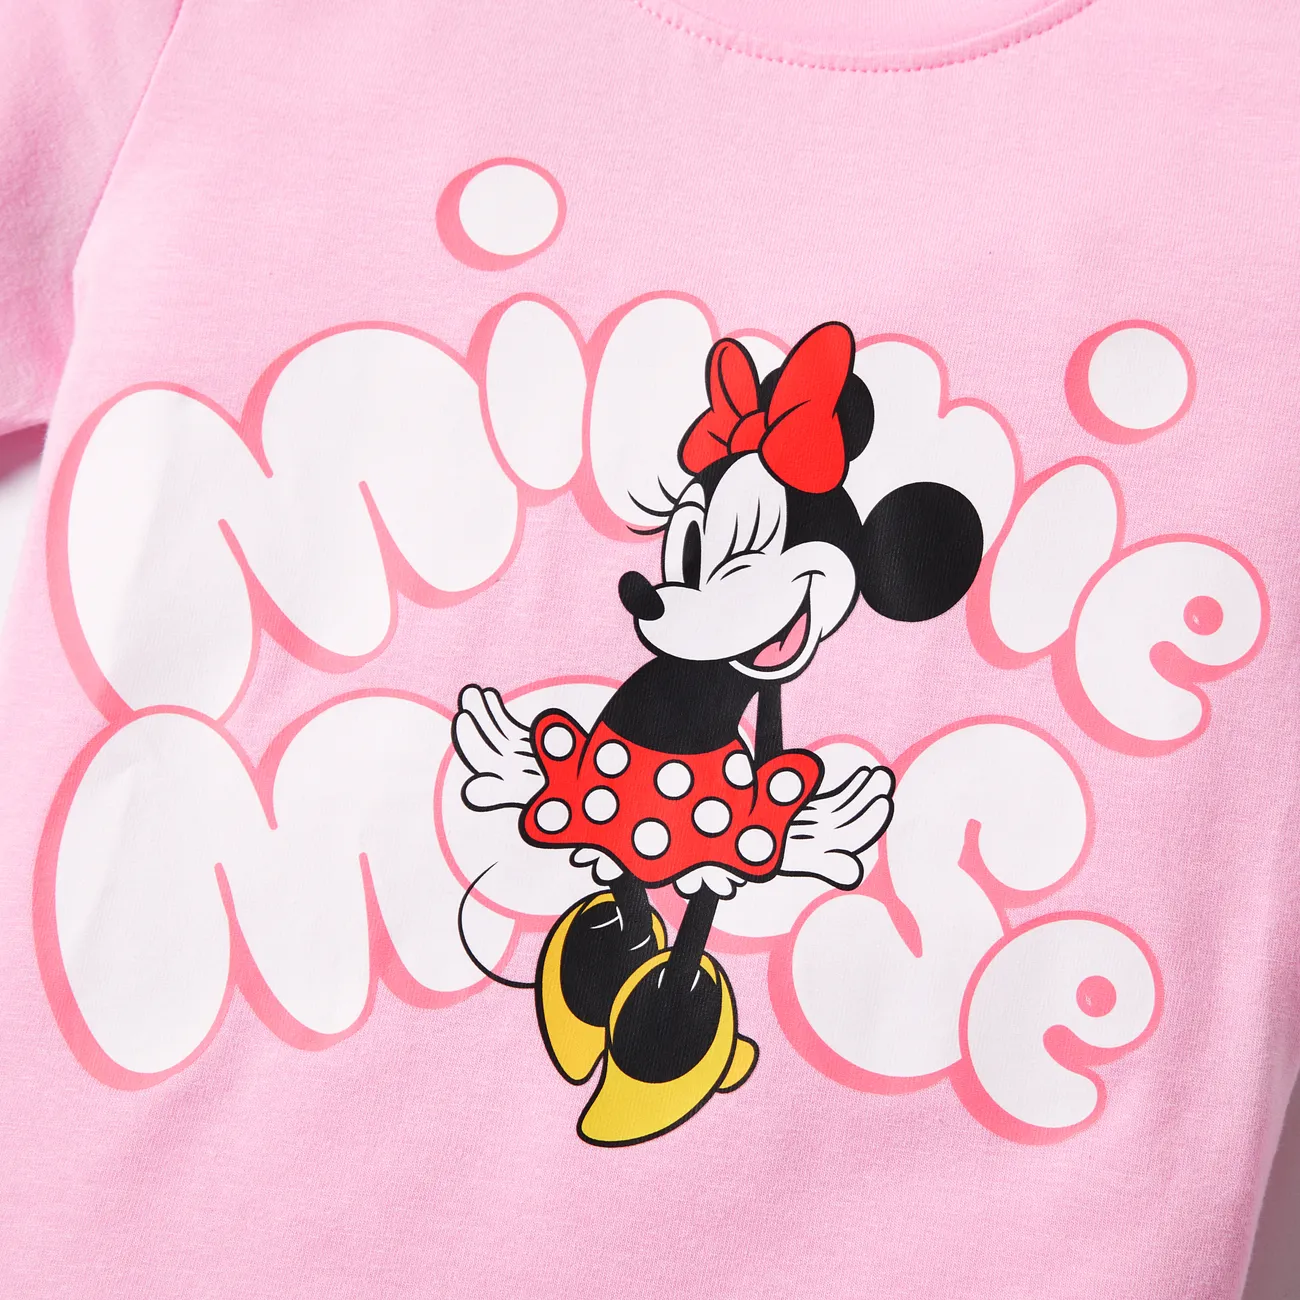 Disney Mickey and Friends Familien-Looks Muttertag Kurzärmelig Familien-Outfits Oberteile rosa big image 1